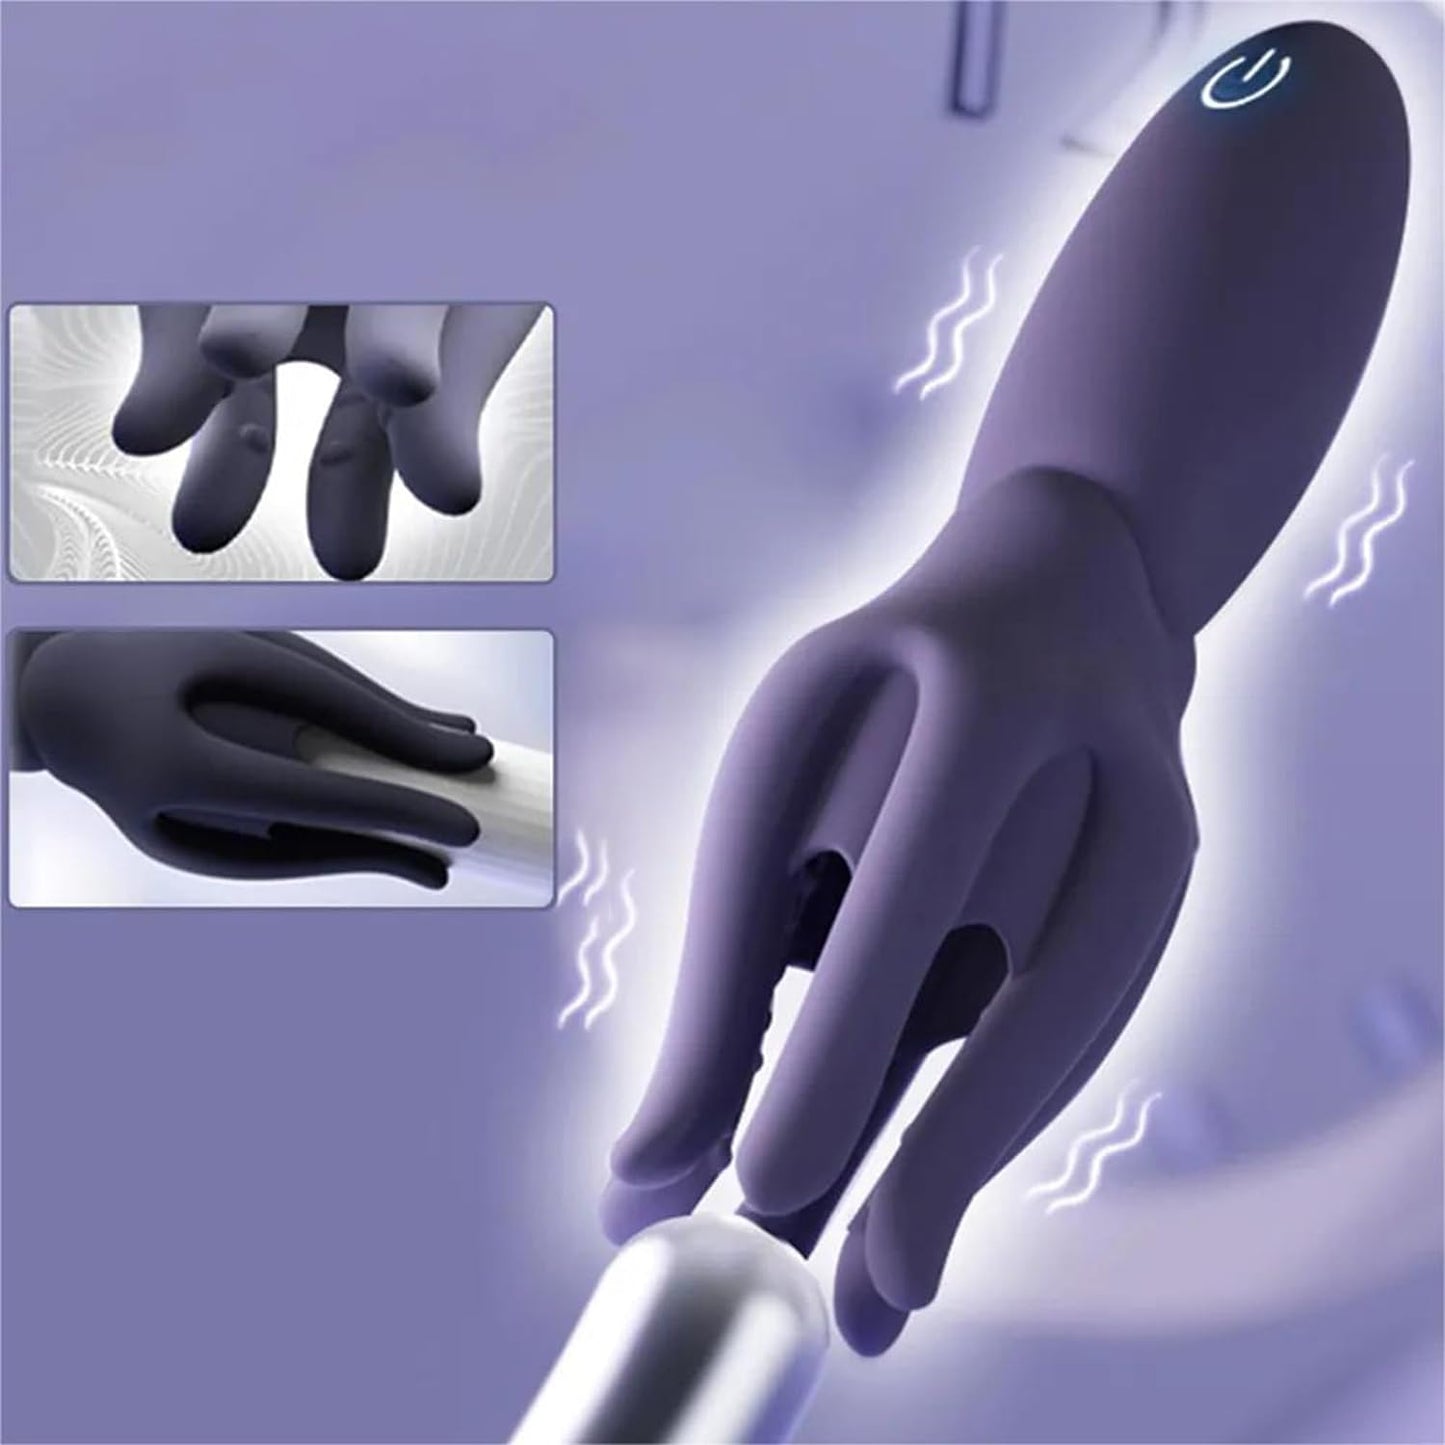 3-in-1 penis massager automatic masturbator massager with 10 vibration modes 